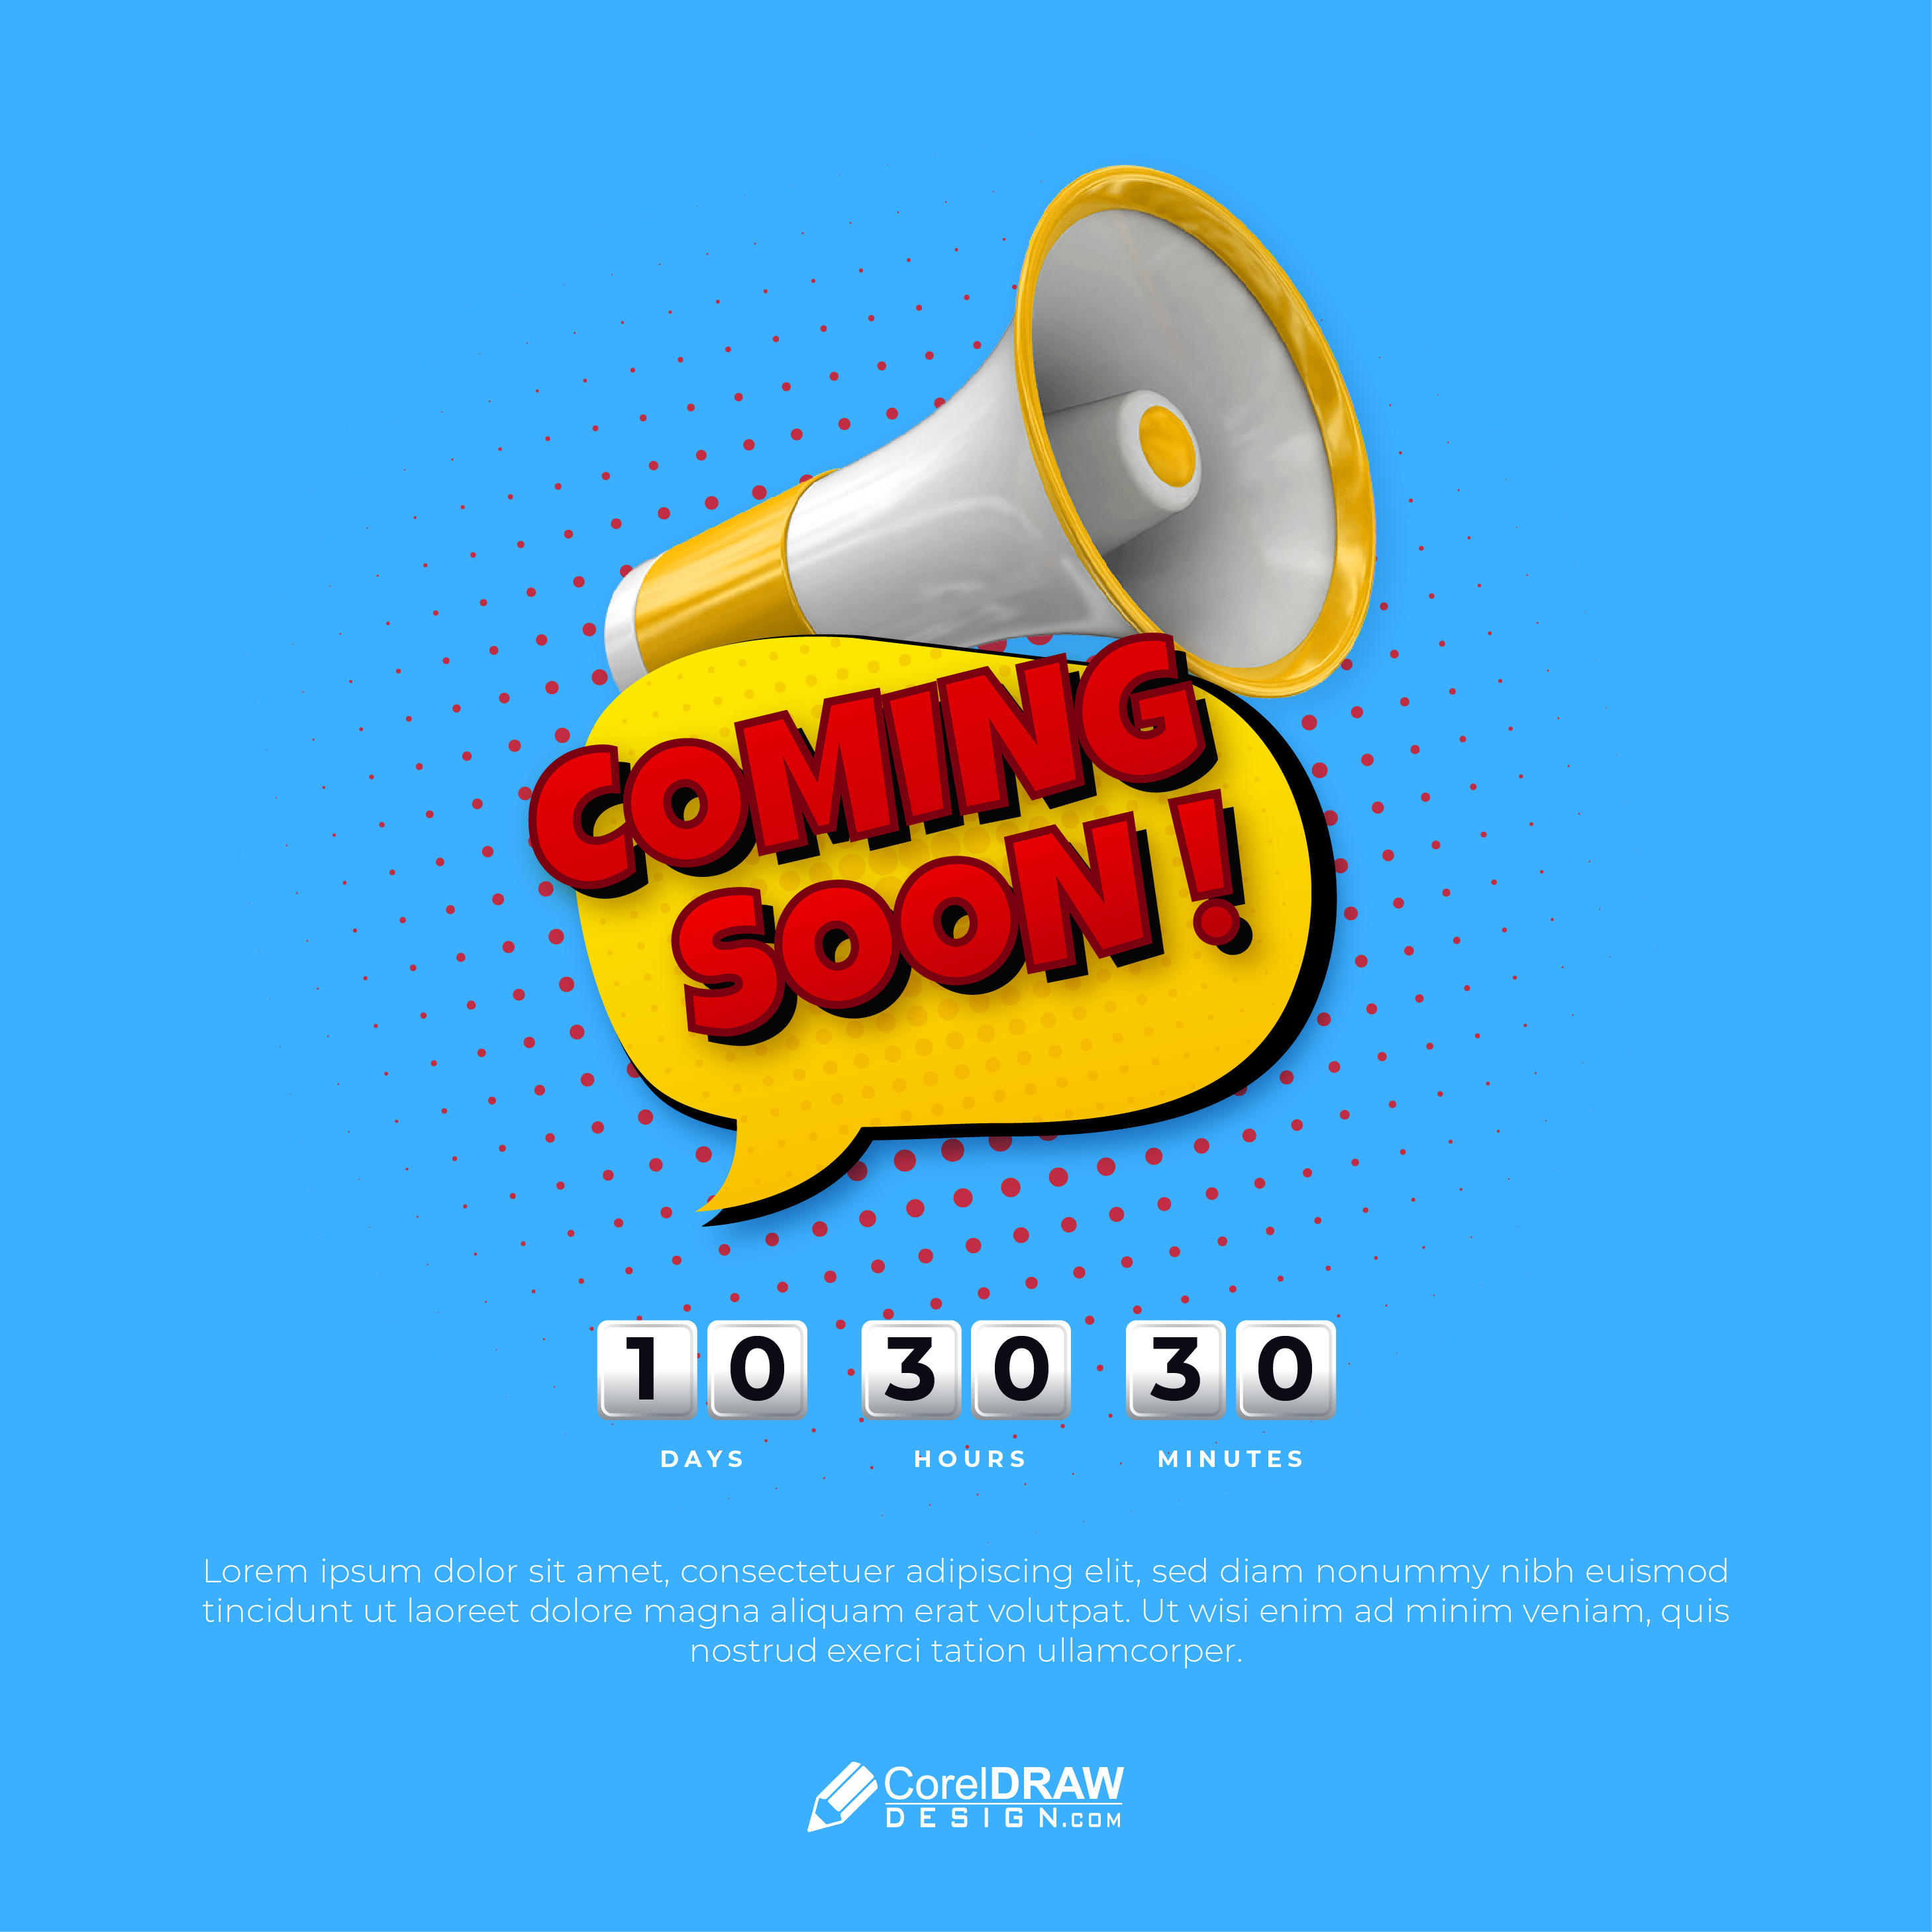 grand opening, opening soon, launching soon Template